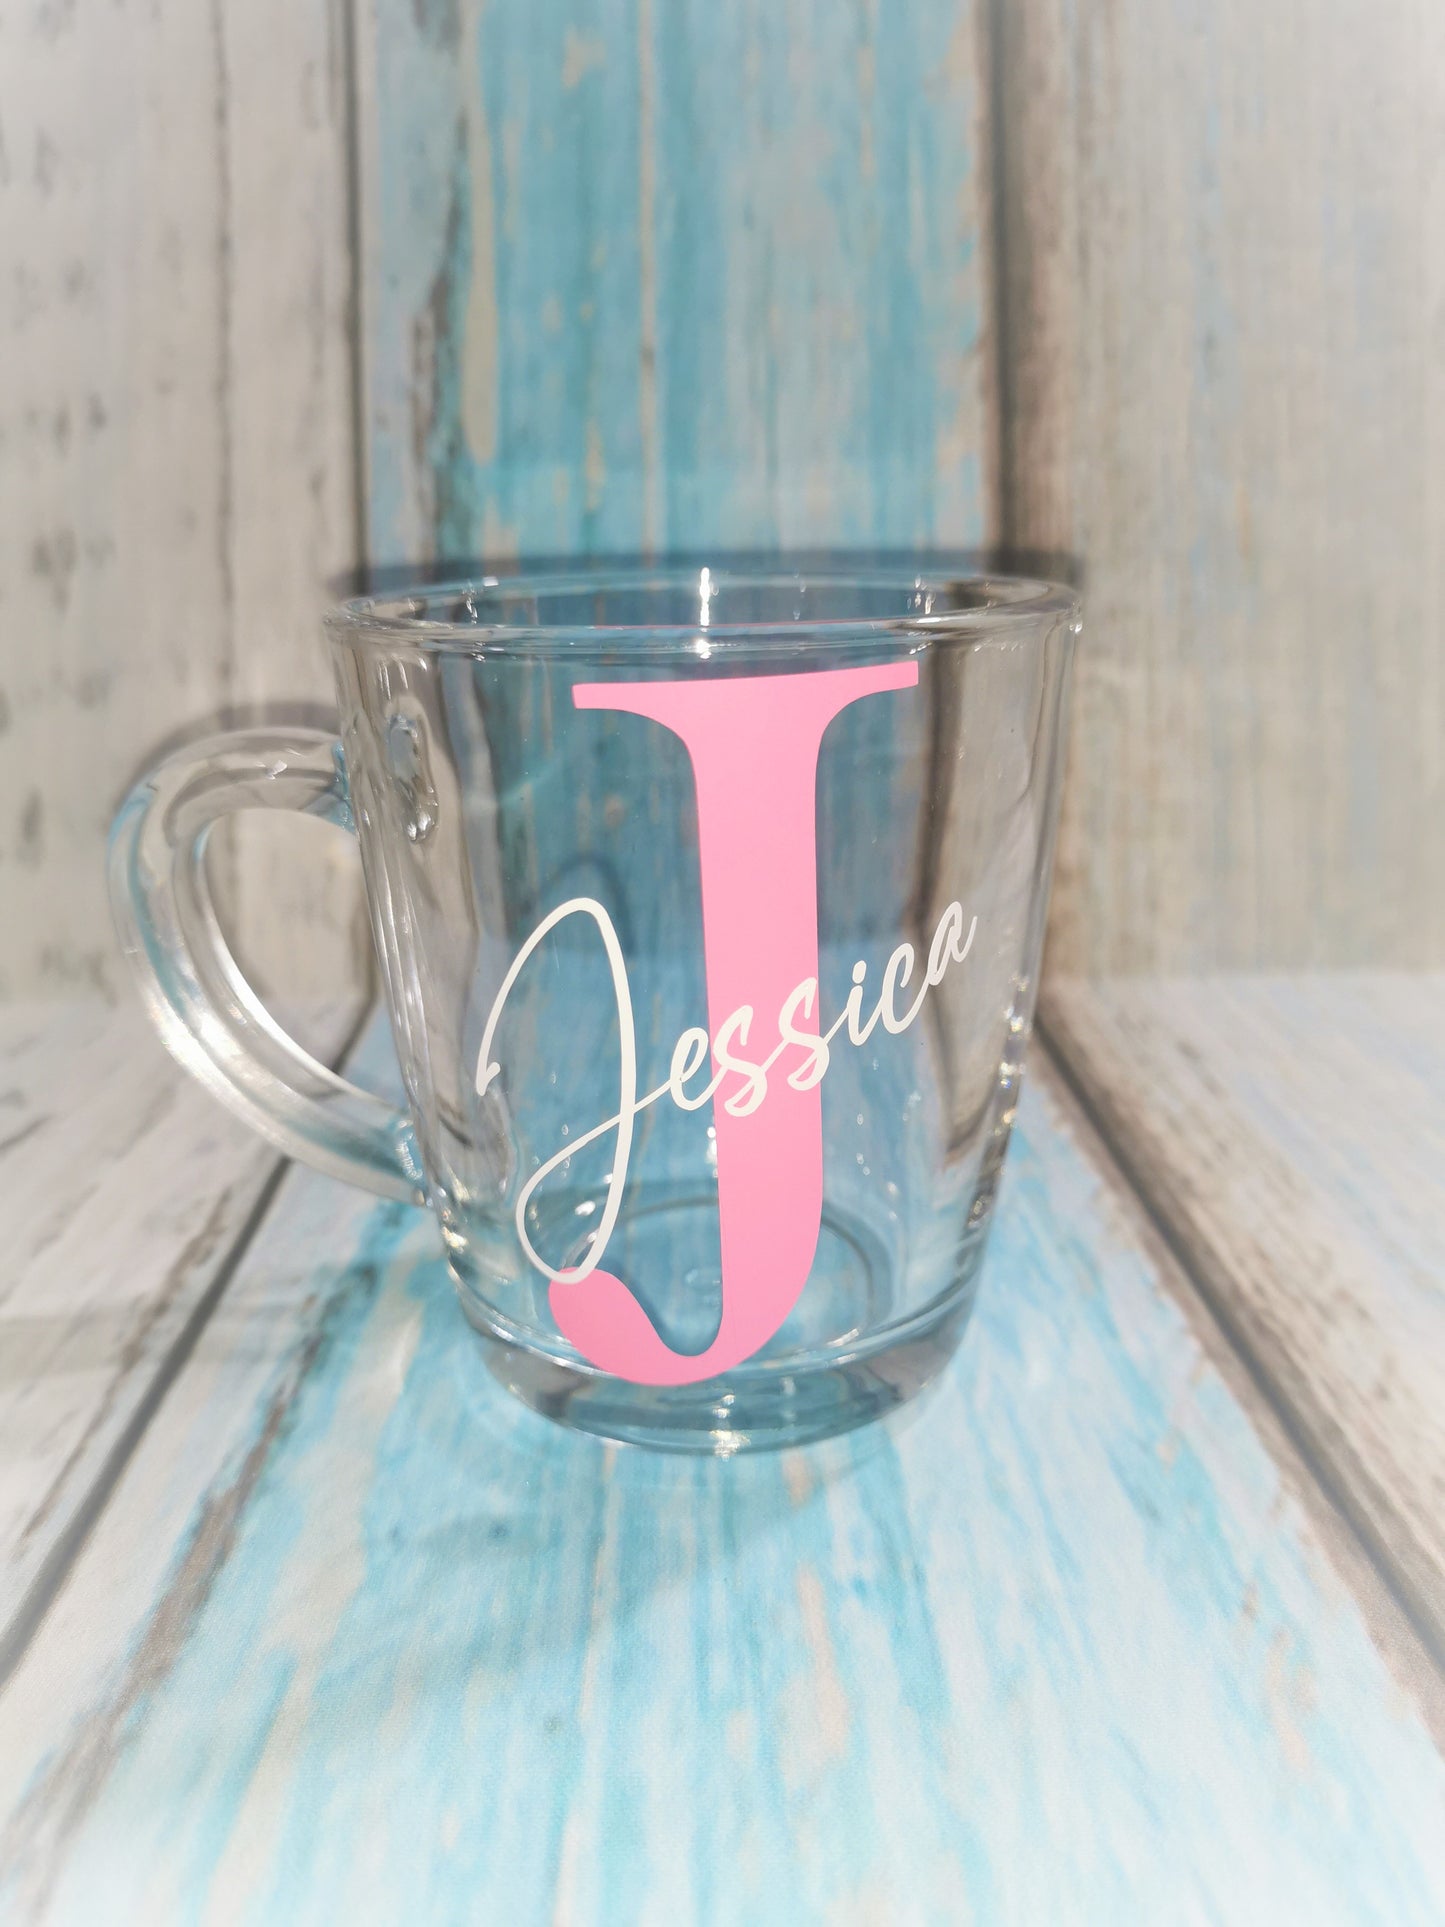 Custom Glass Coffee Mugs with Personalisation - Initial and Name or your choice of drink "Coffee Please"